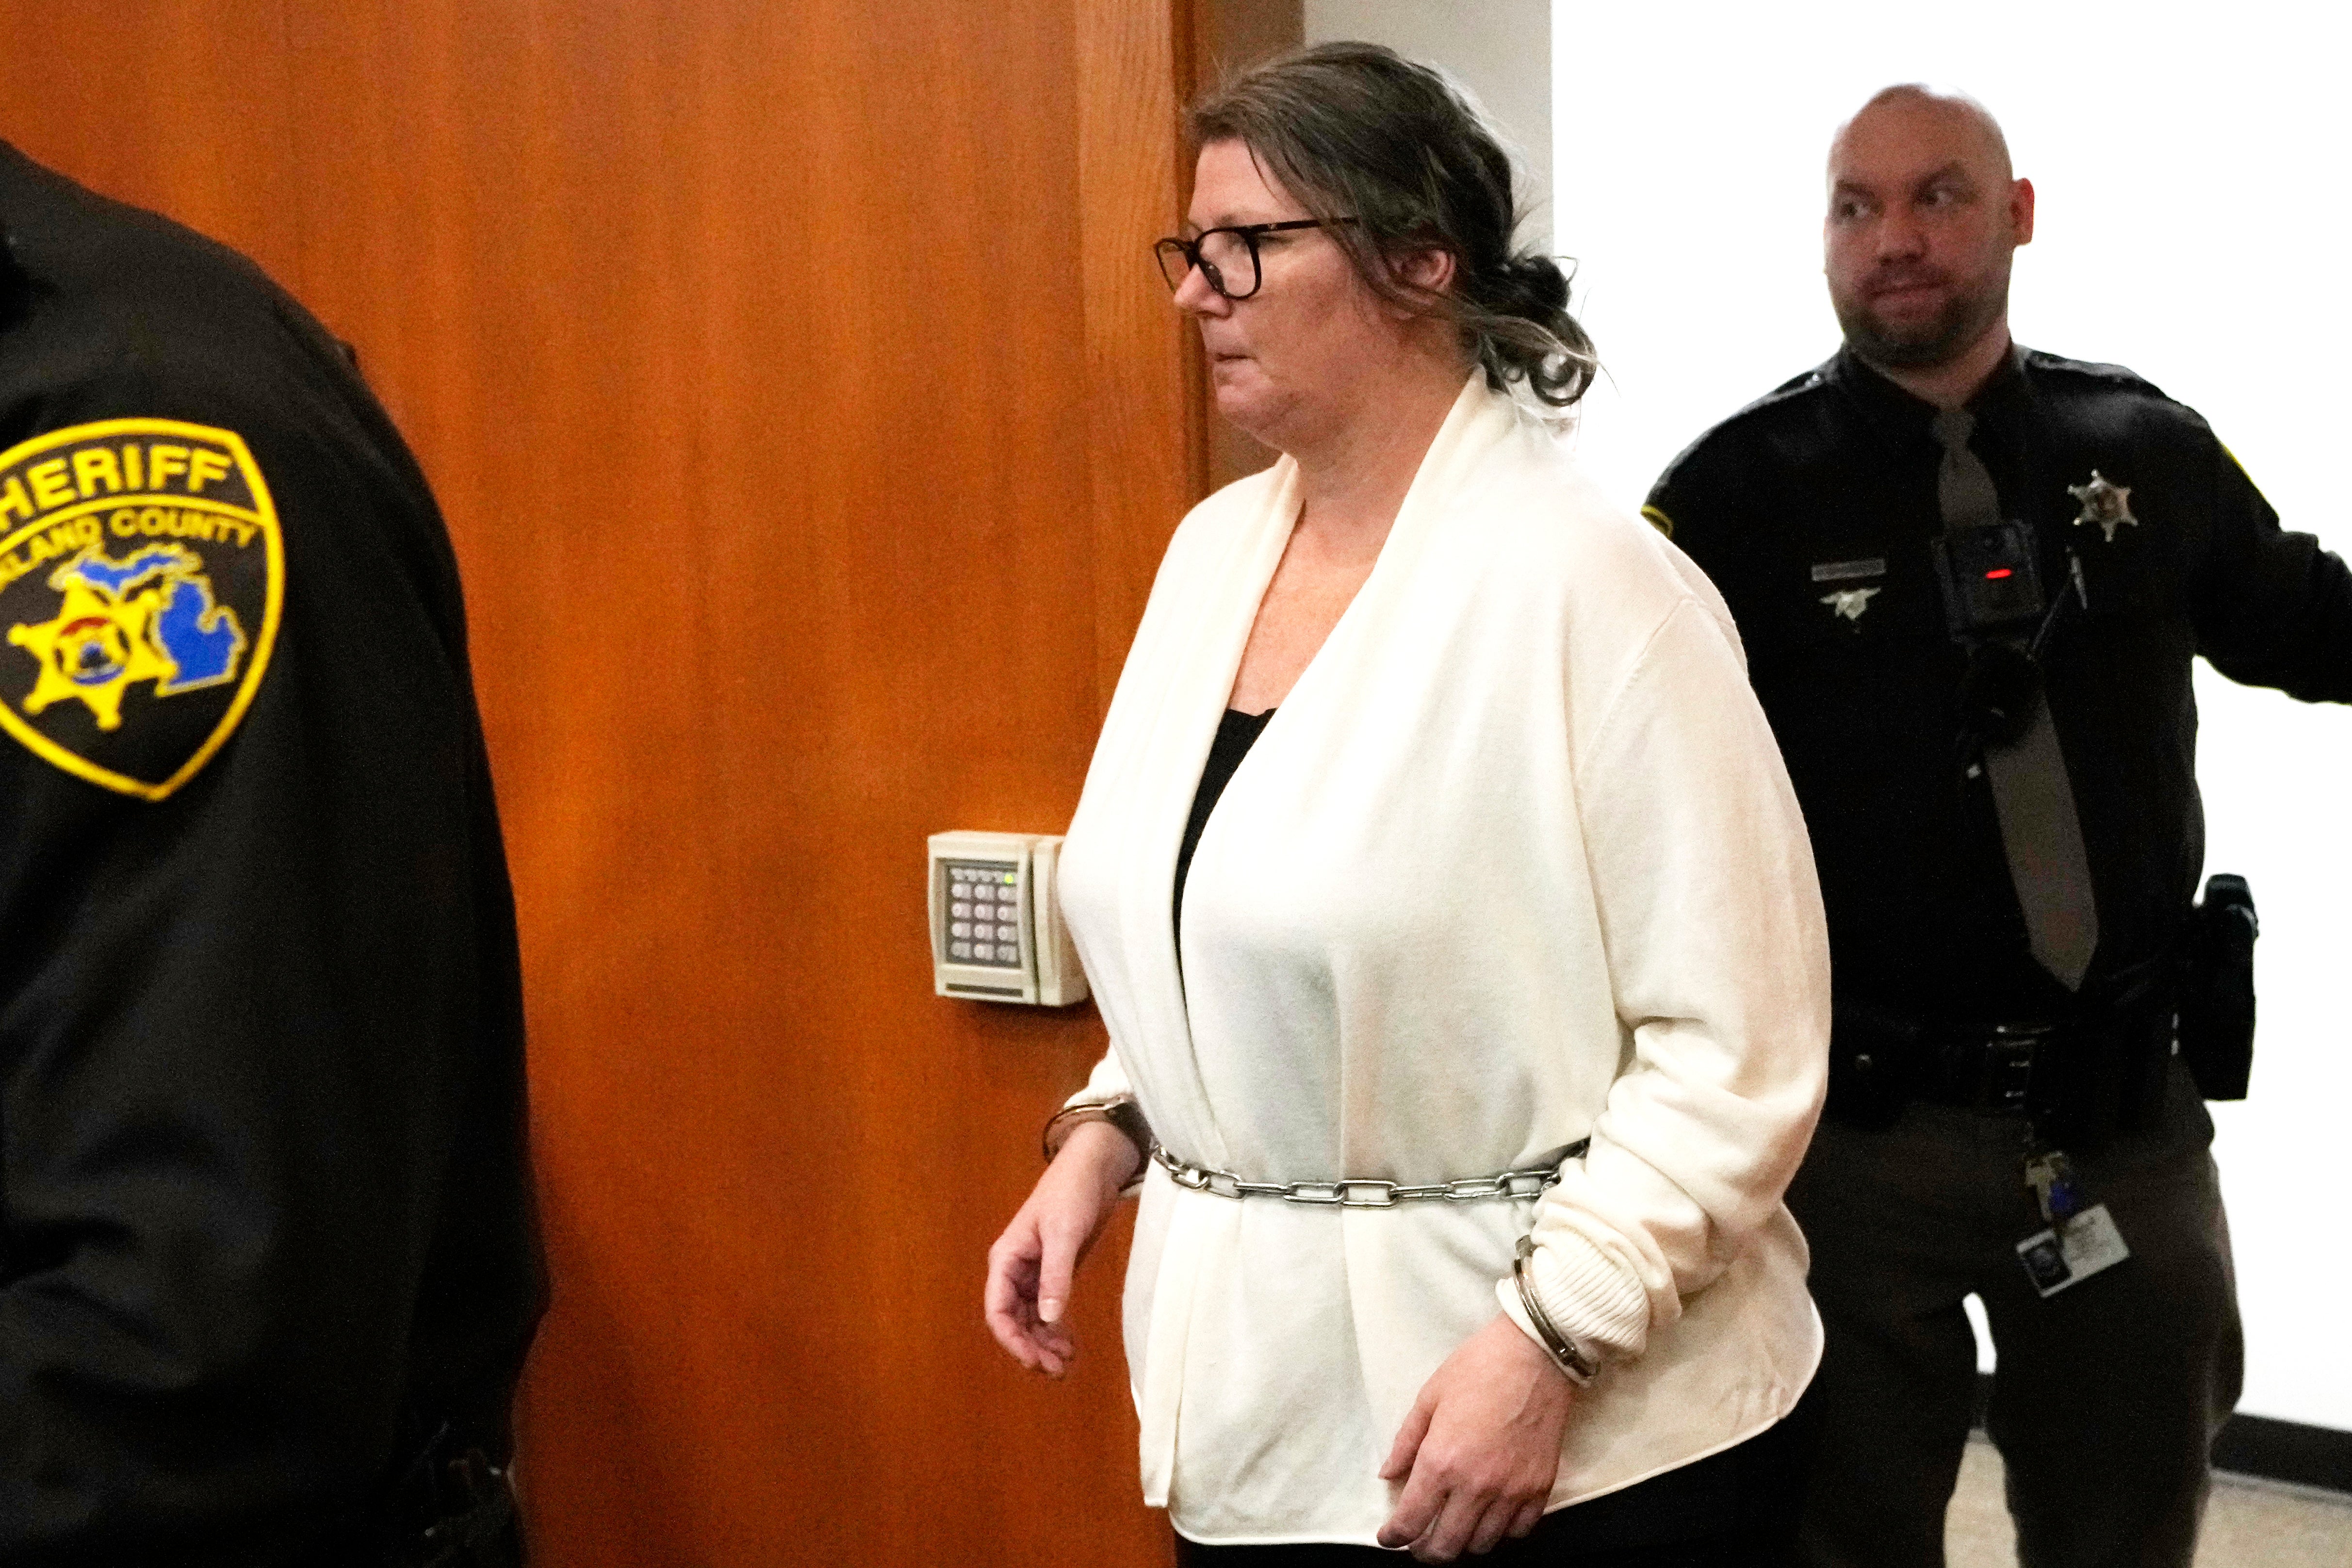 Jennifer Crumbley arrives in court, Monday, Feb. 5, 2024 in Pontiac, Mich. The jury received instructions from a judge and begin deliberations in an unusual trial against a school shooter's mother. The deliberations which began Monday could send Crumbley to prison if she is convicted of contributing to the deaths of four students in 2021.